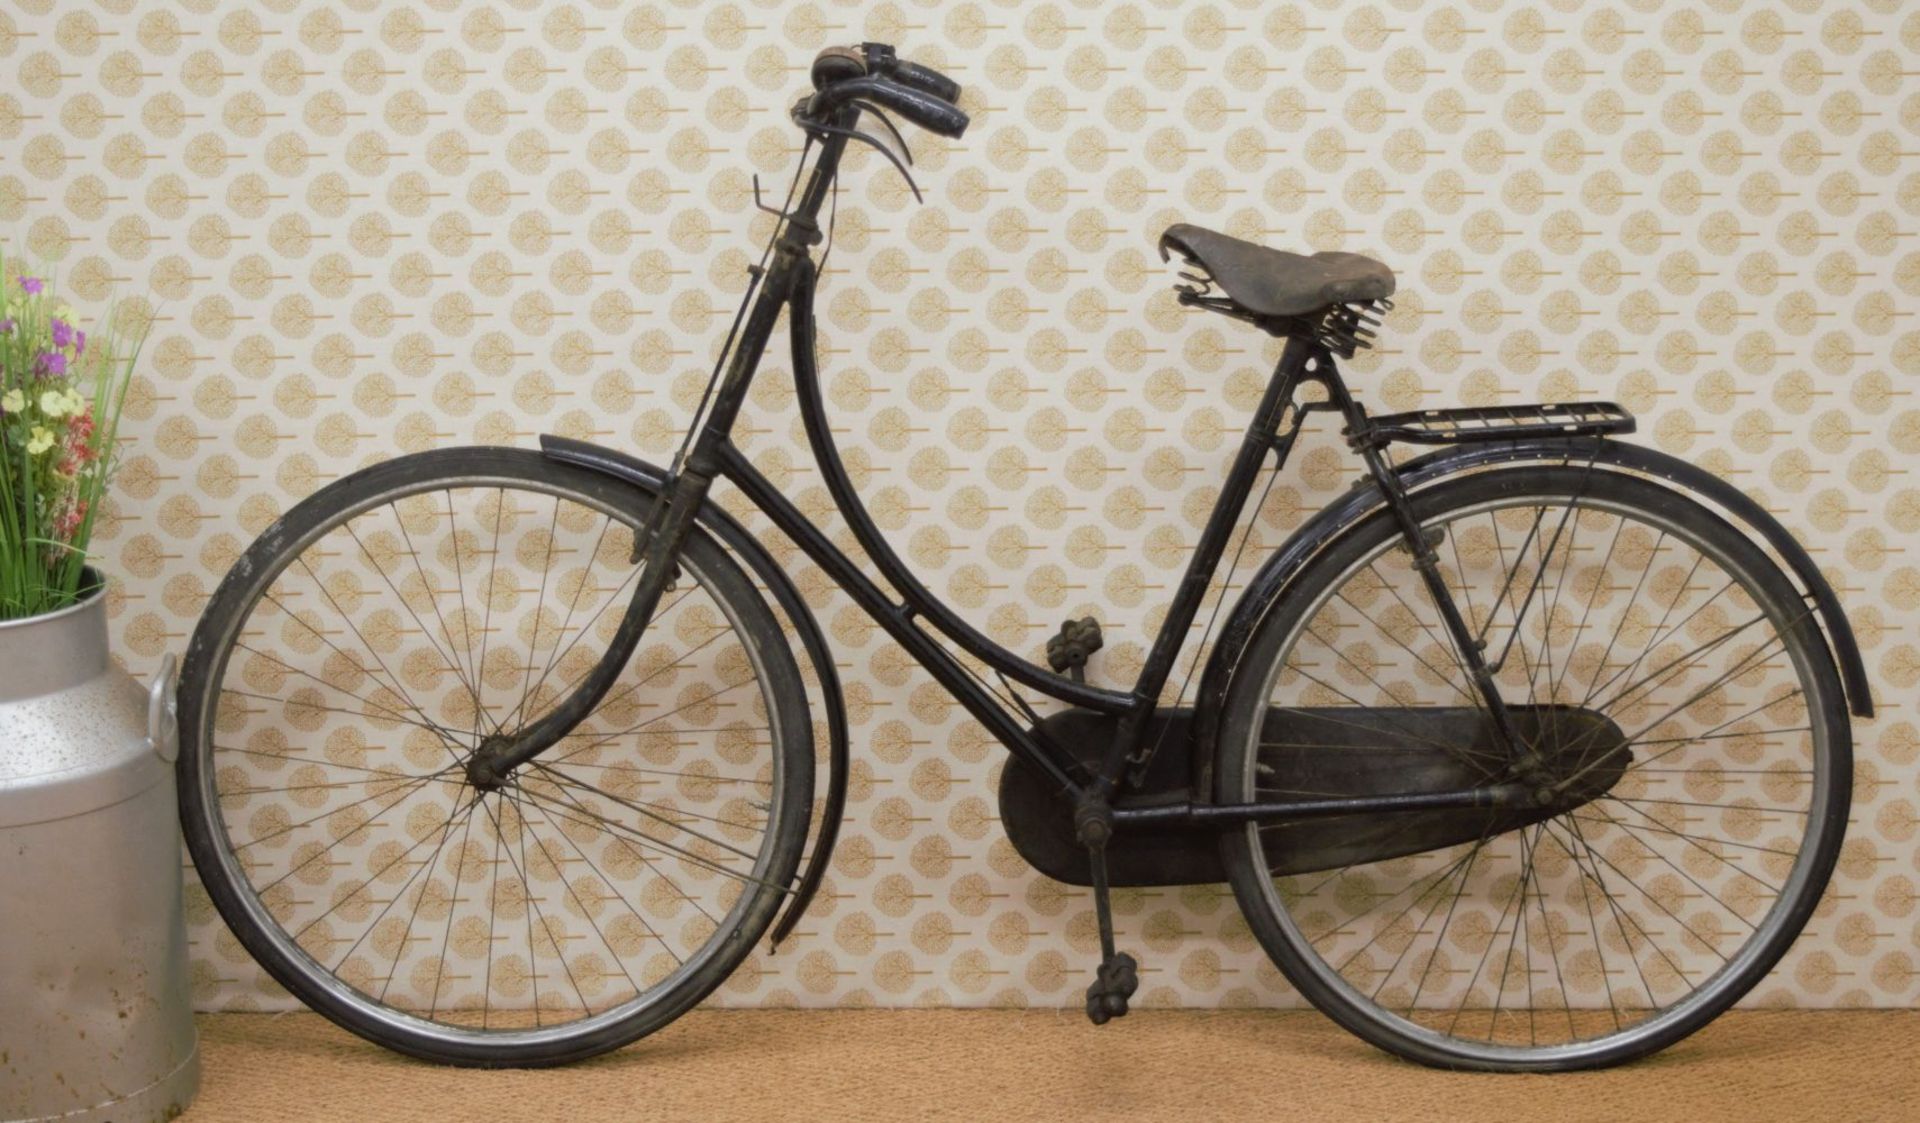 ALL-BLACK GOLDEN SUNBEAM LADY'S BICYCLE